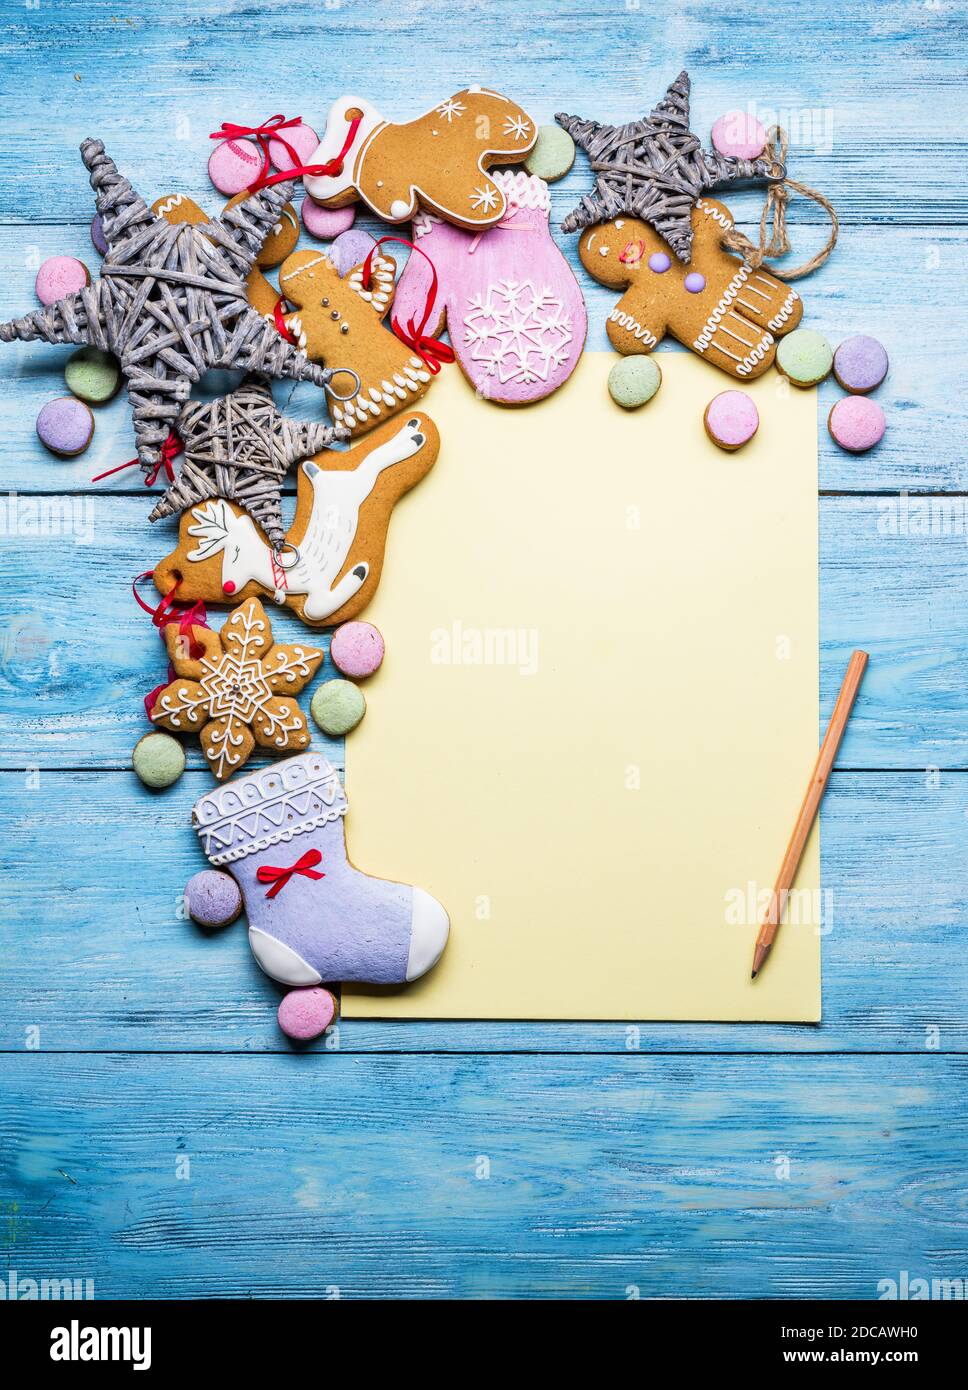 Empty Santa letter with Christmas traditional ginger cookies around it on wooden background. Christmas or New Year holiday background. Top view. Stock Photo